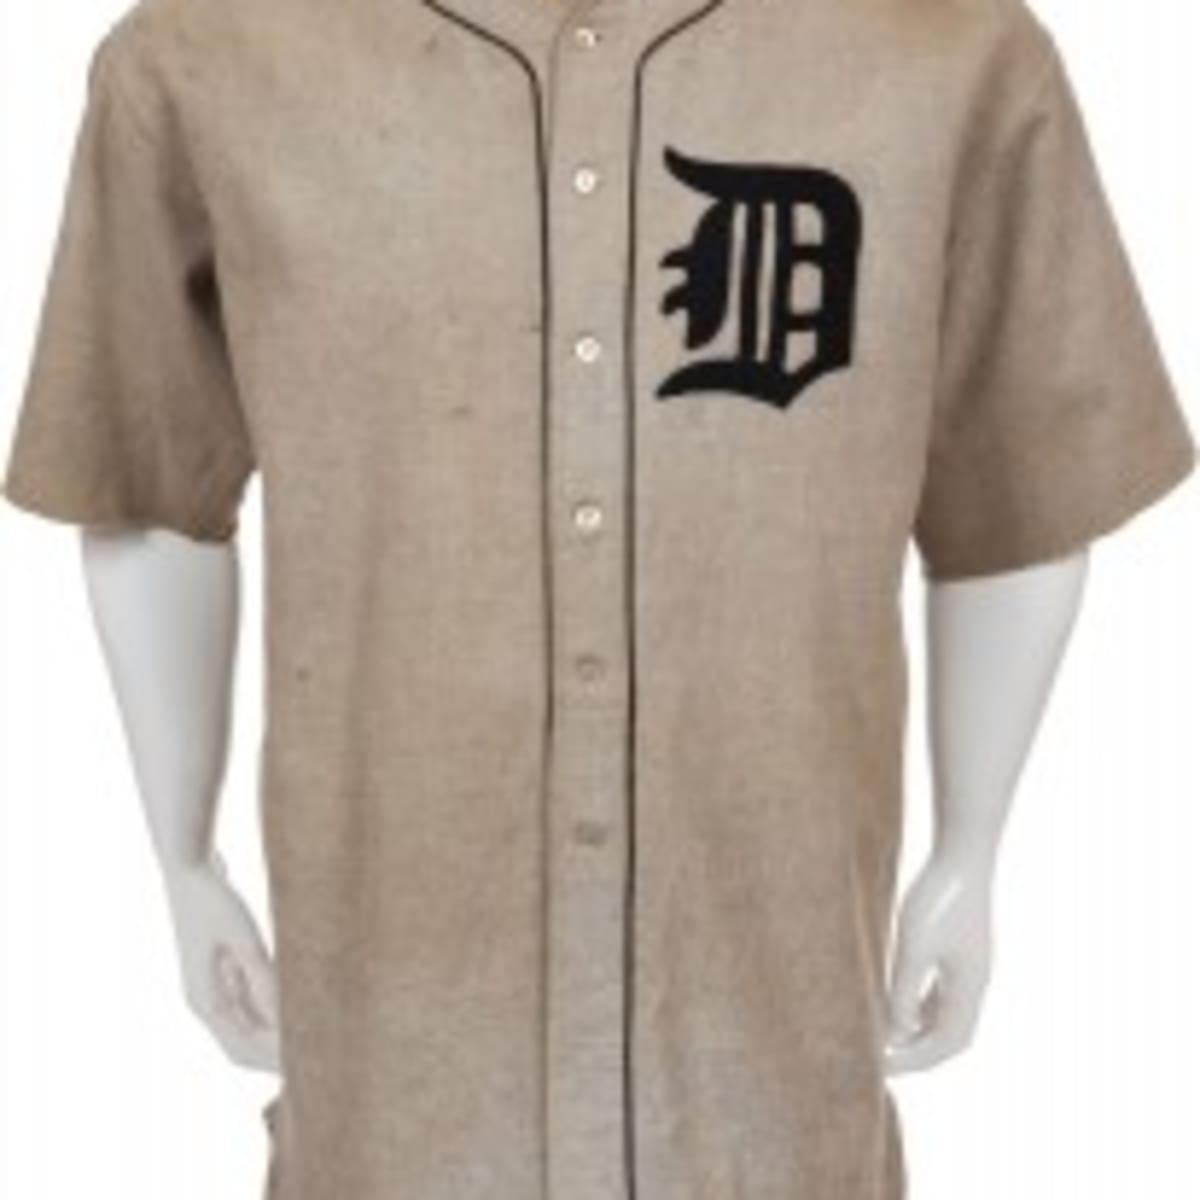 Earliest Ty Cobb Uniform Offered by Heritage - Sports Collectors Digest